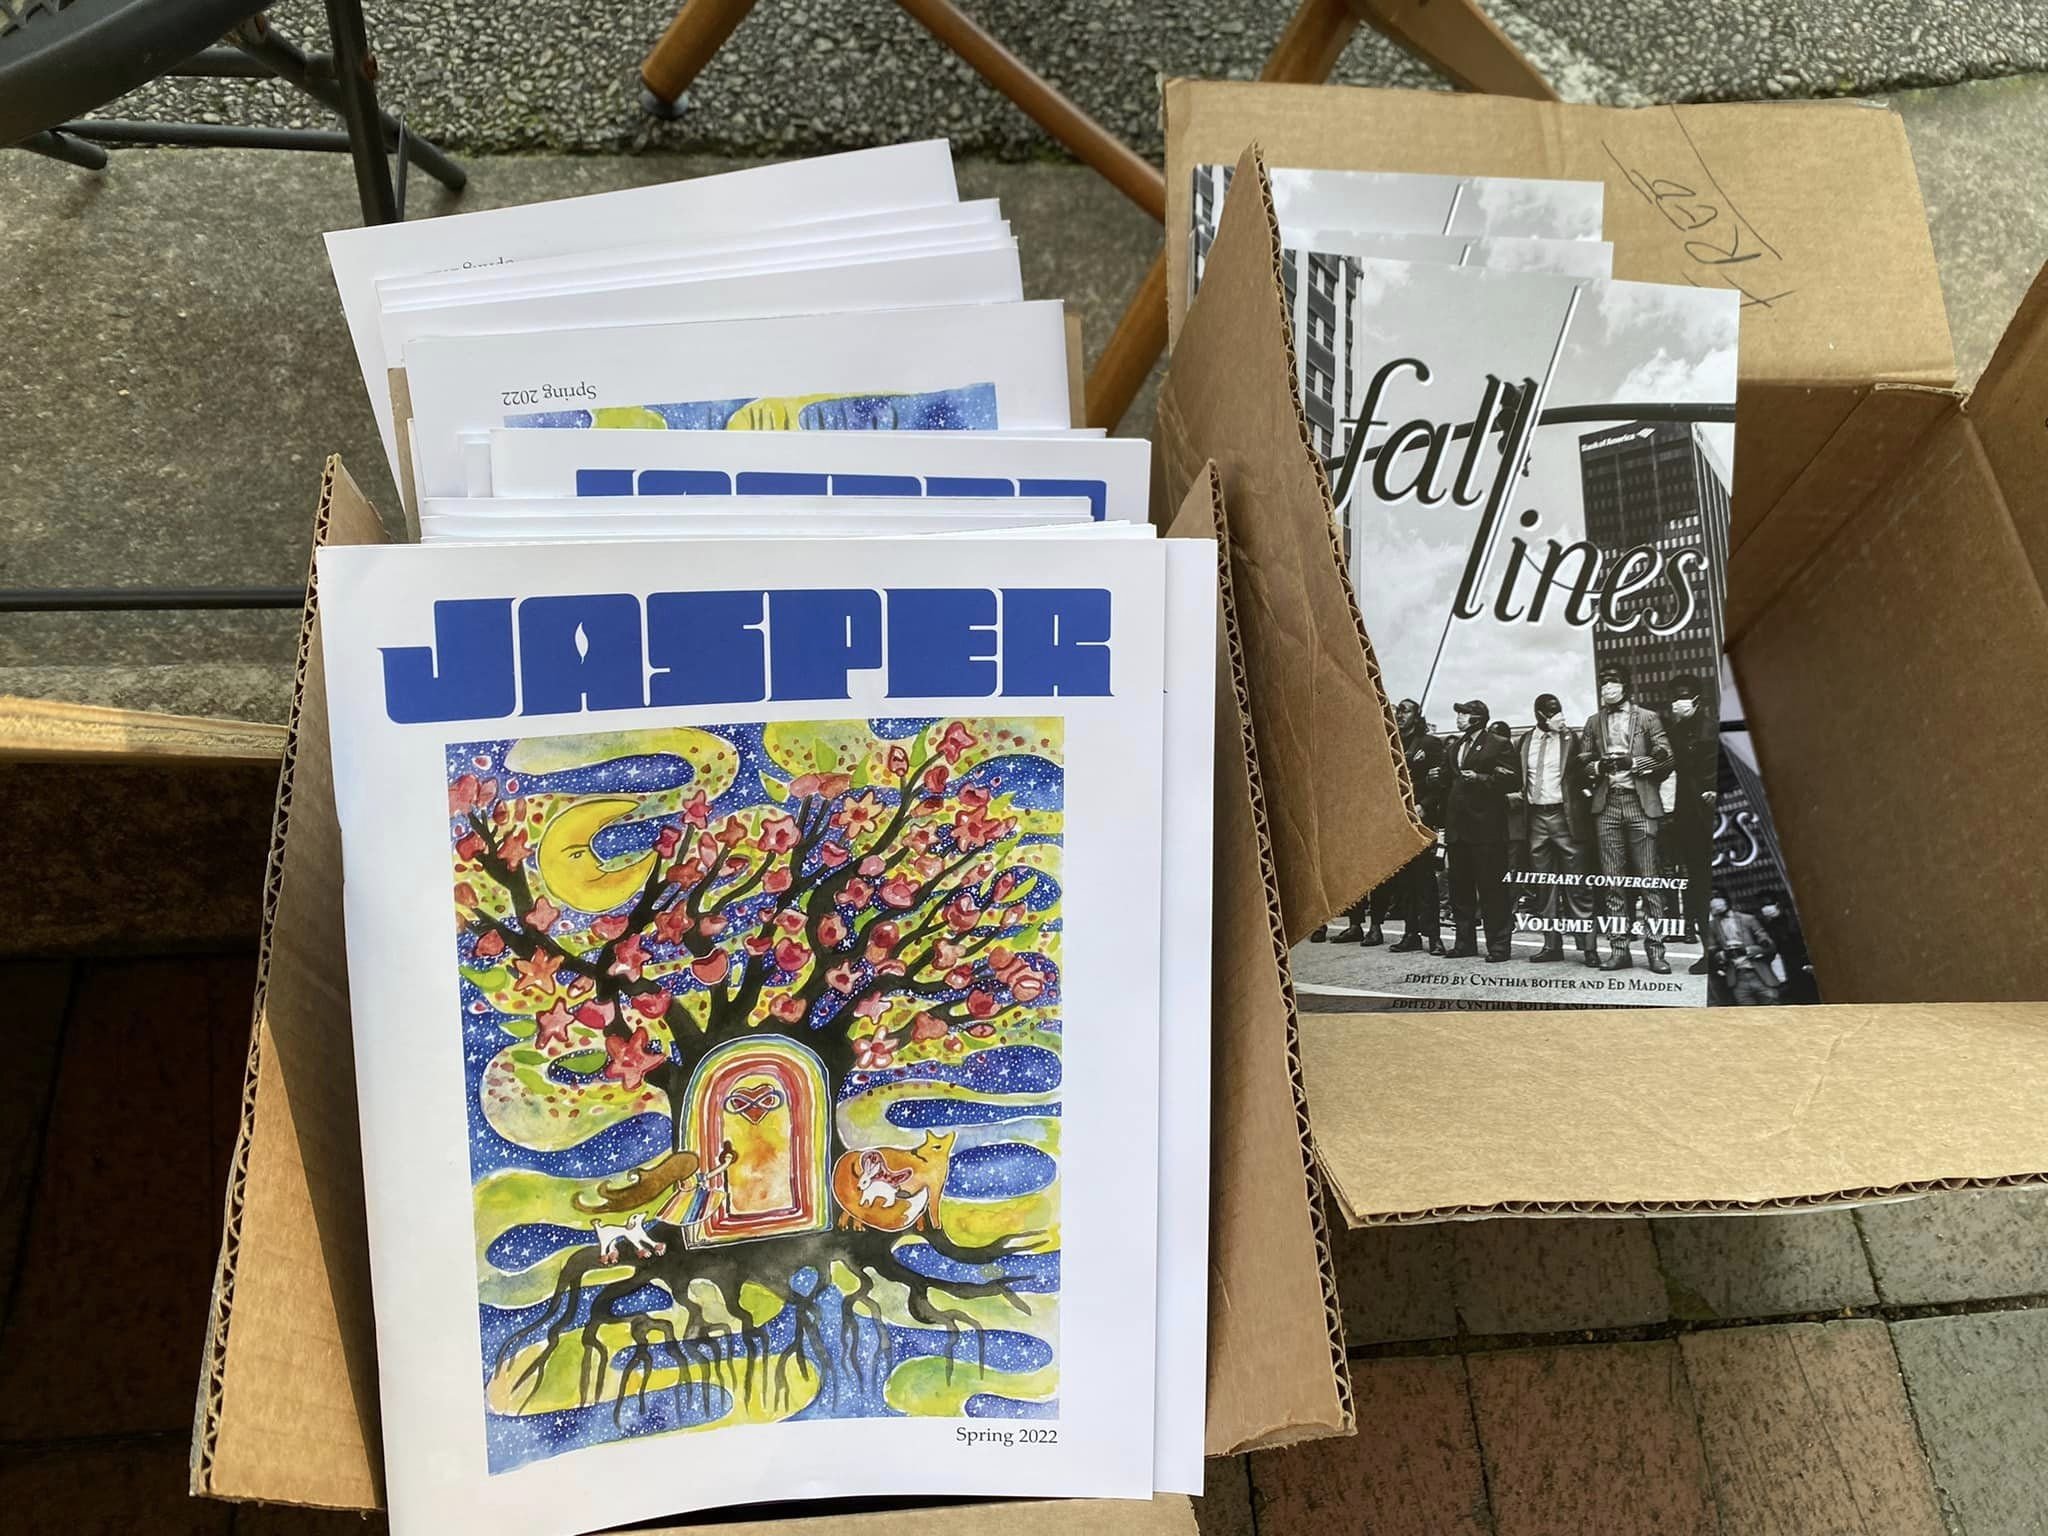 Jasper's Spring 2022 issue and 2021-2020 Issue of Fall Lines